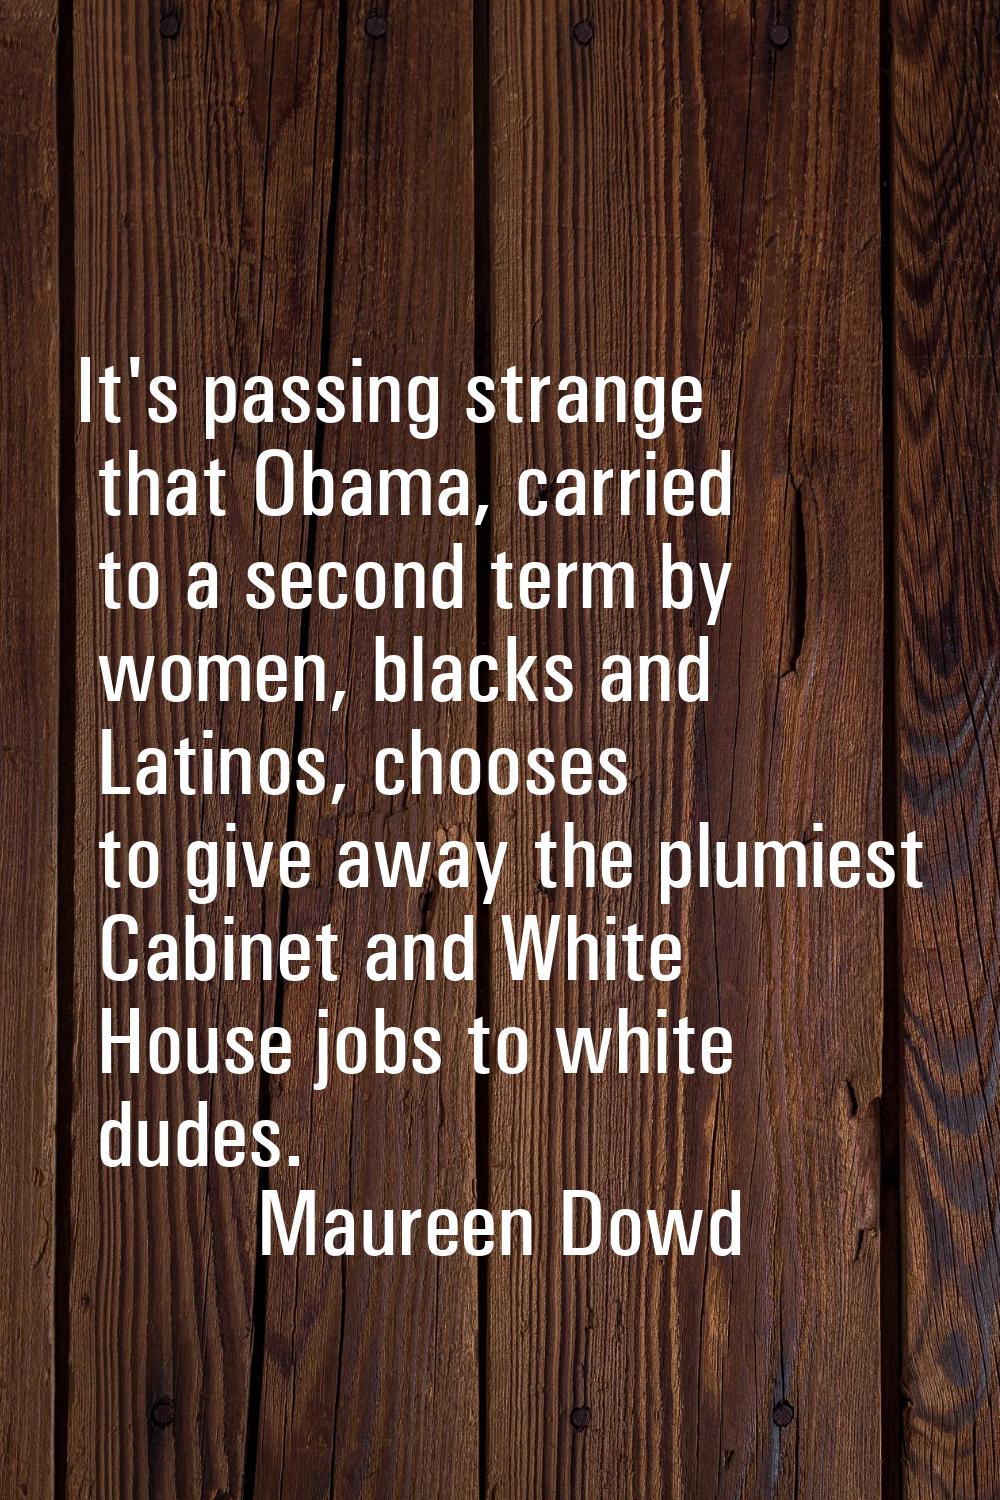 It's passing strange that Obama, carried to a second term by women, blacks and Latinos, chooses to 